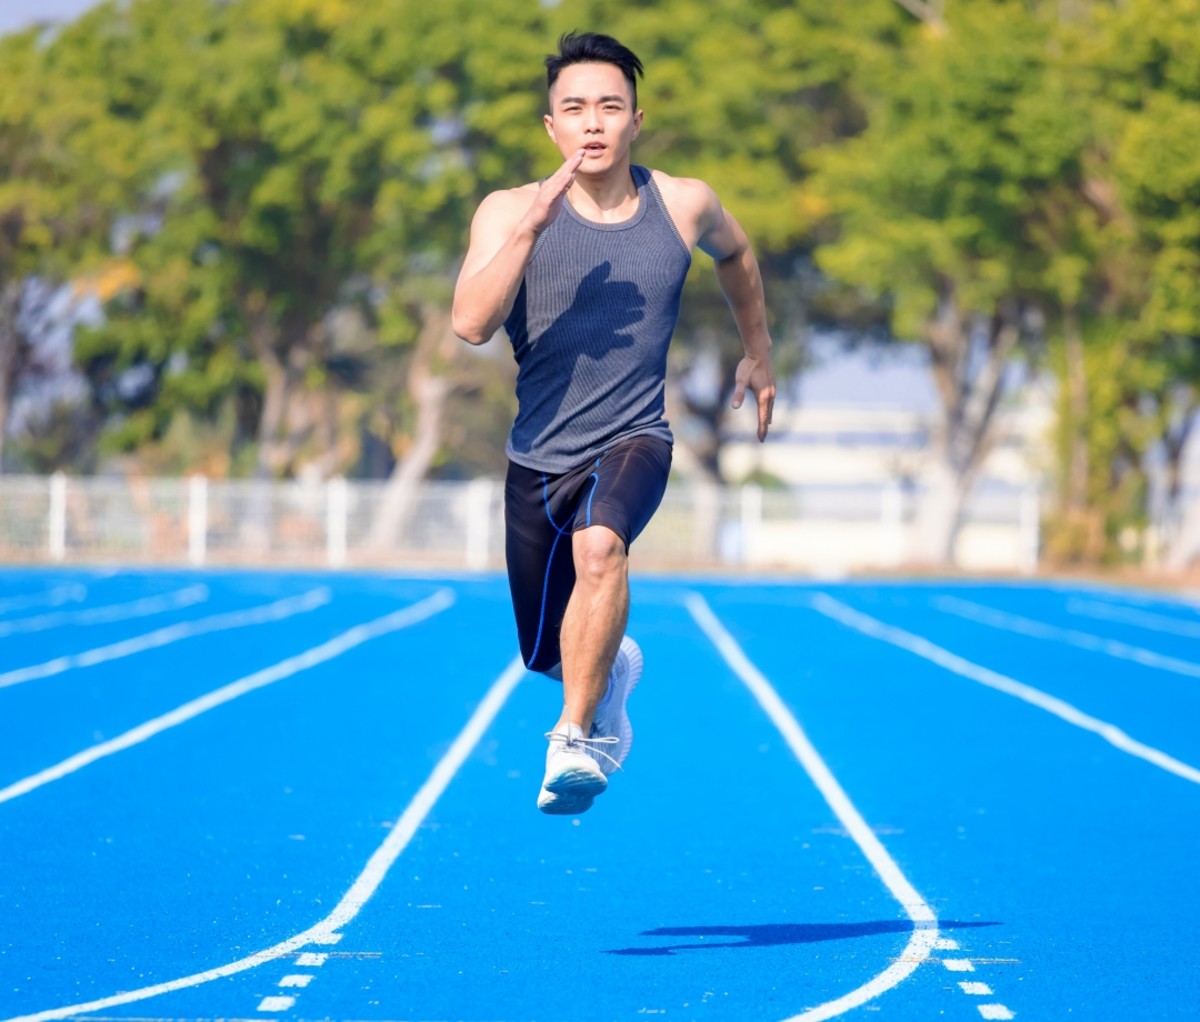 Speed Workouts - The Best Sprint Workouts for Beginners and Advanced Runners